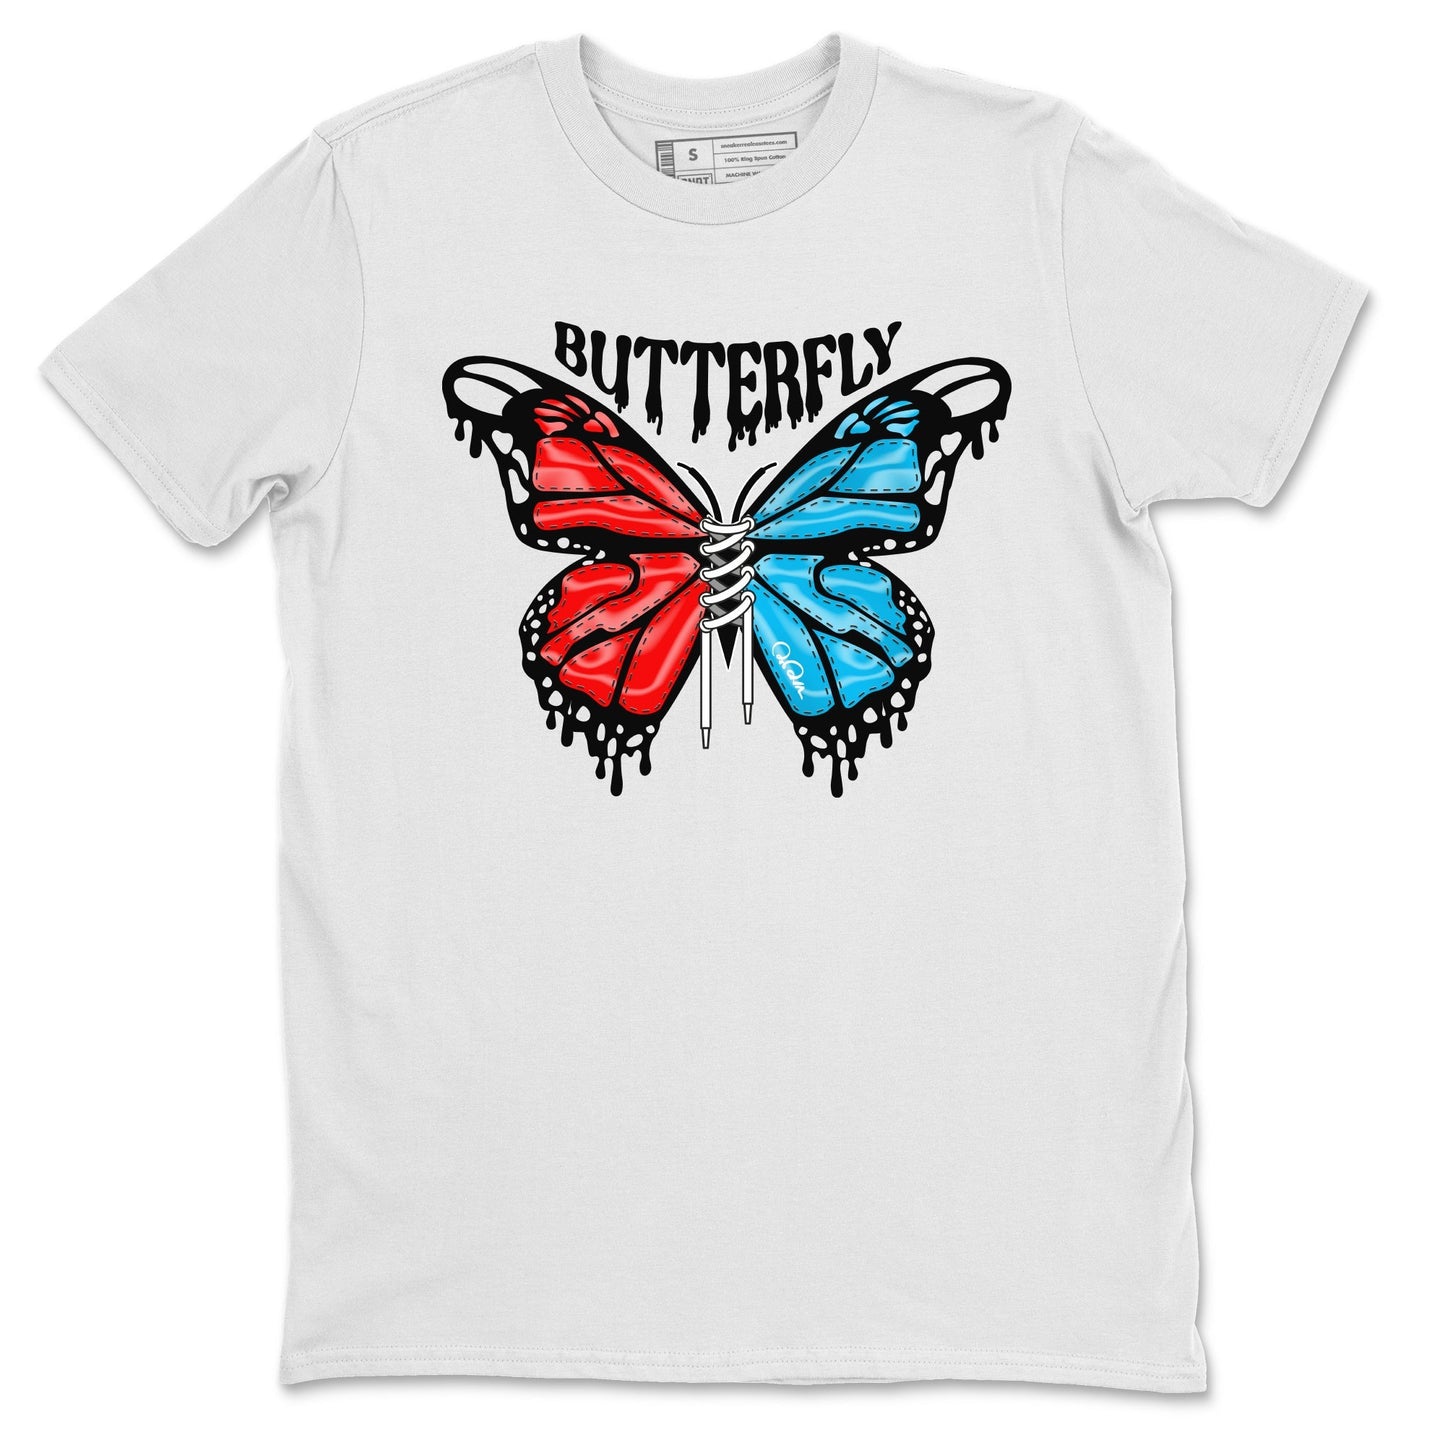 Air Jordan 1 UNC to Chicago Sneaker Match Tees Butterfly Streetwear Sneaker Shirt AJ1 UNC to Chicago Sneaker Release Tees Unisex Shirts White 2